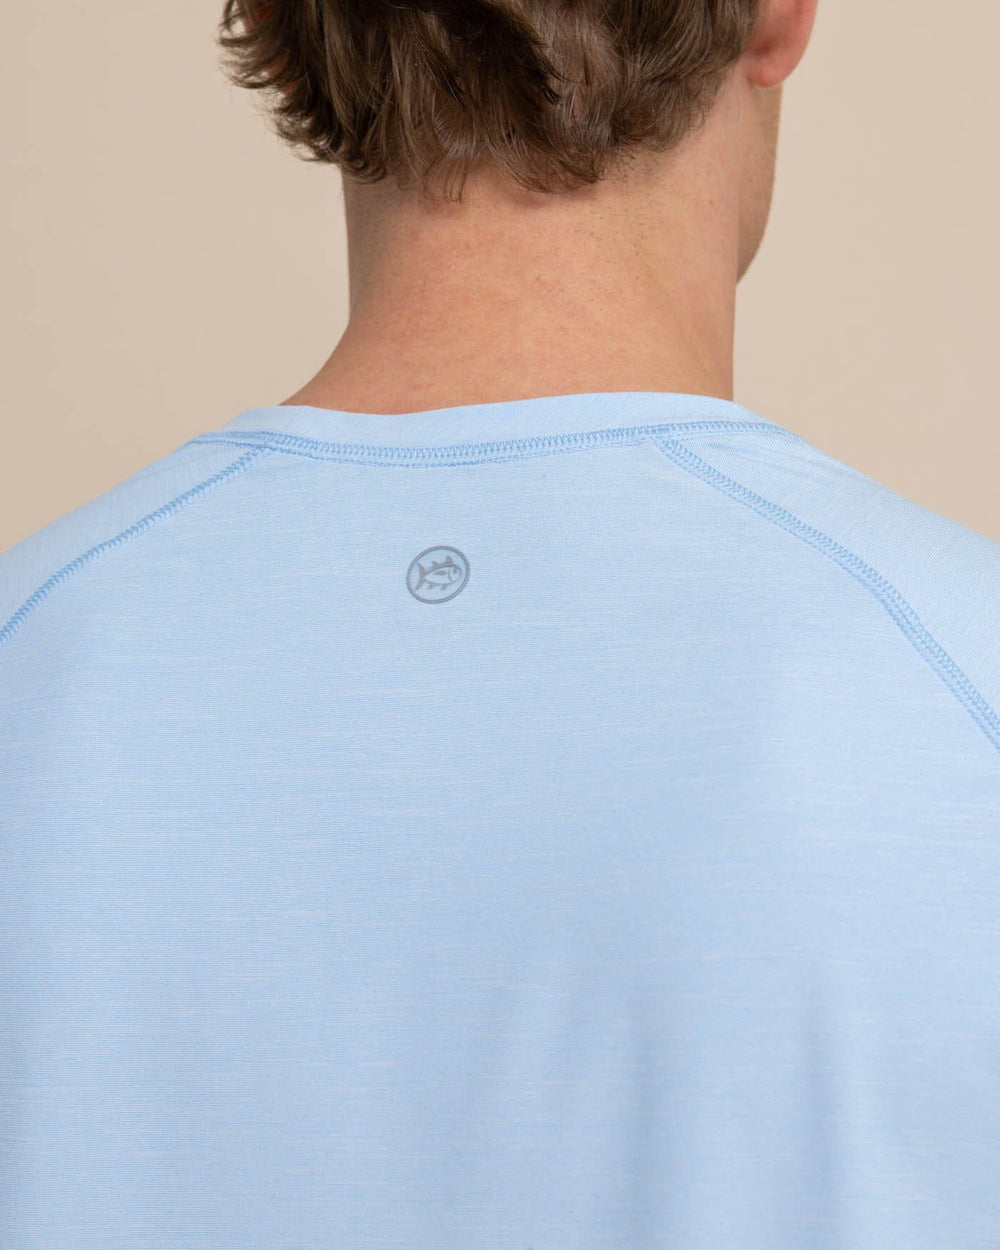 The detail view of the Southern Tide brrr illiant Performance Long Sleeve T-Shirt by Southern Tide - Clearwater Blue